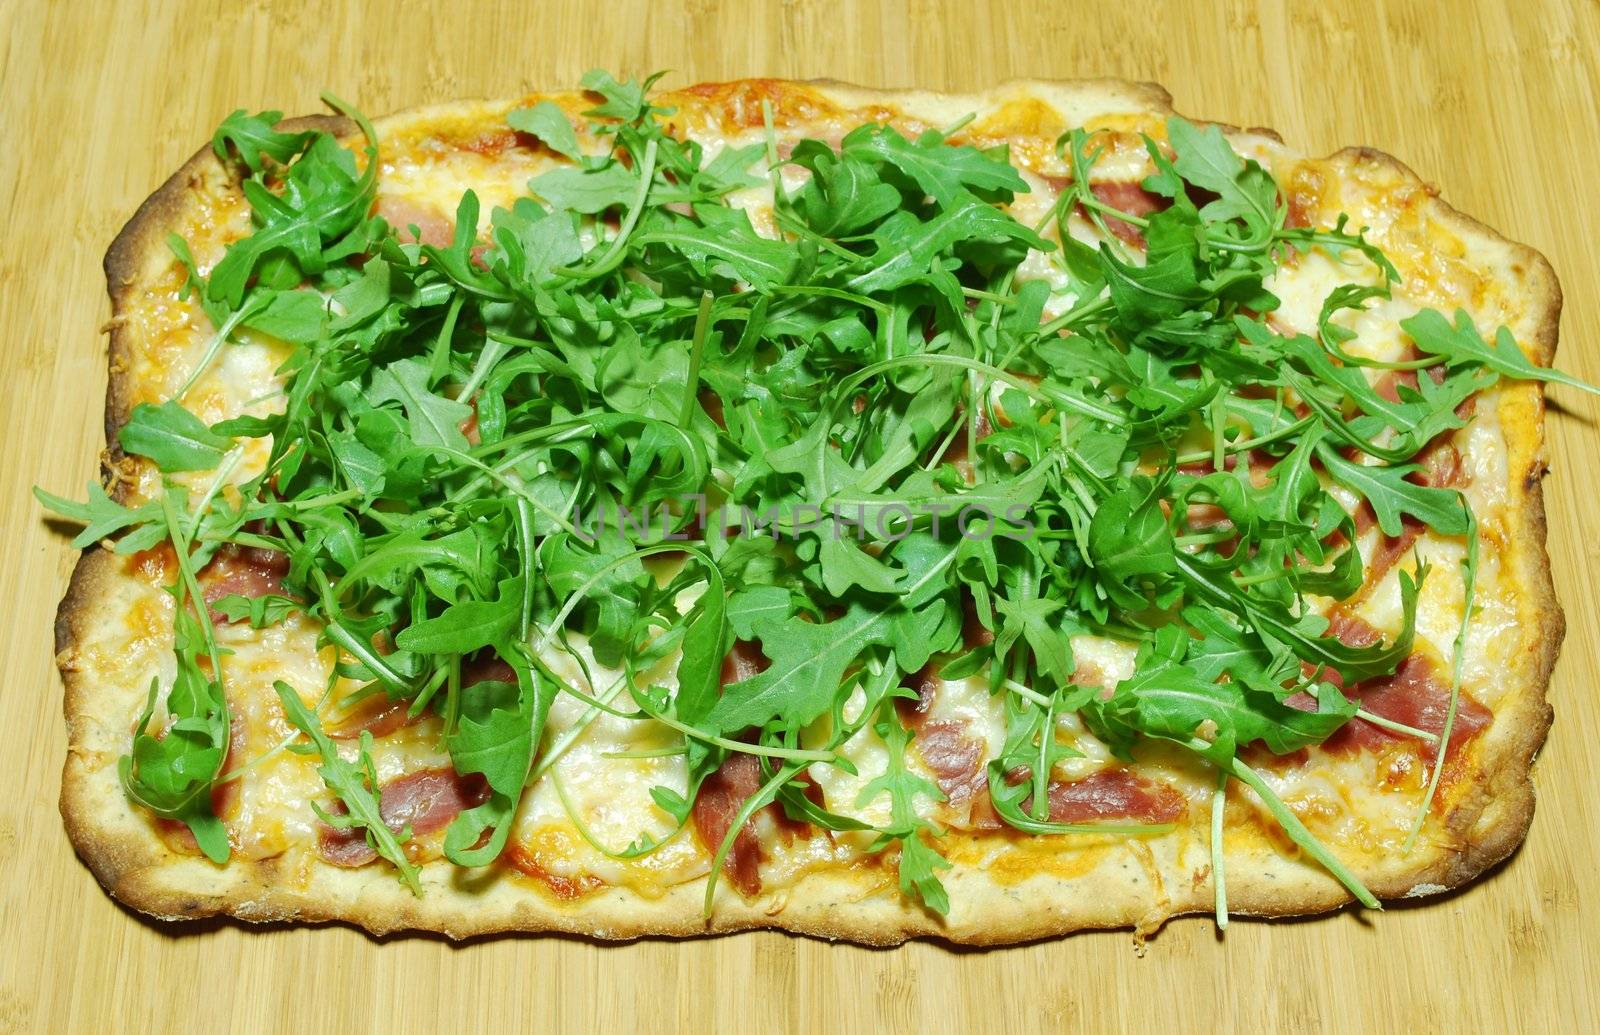 homemade pizza with 3 cheeses with prosciutto and arugula (on wooden board)